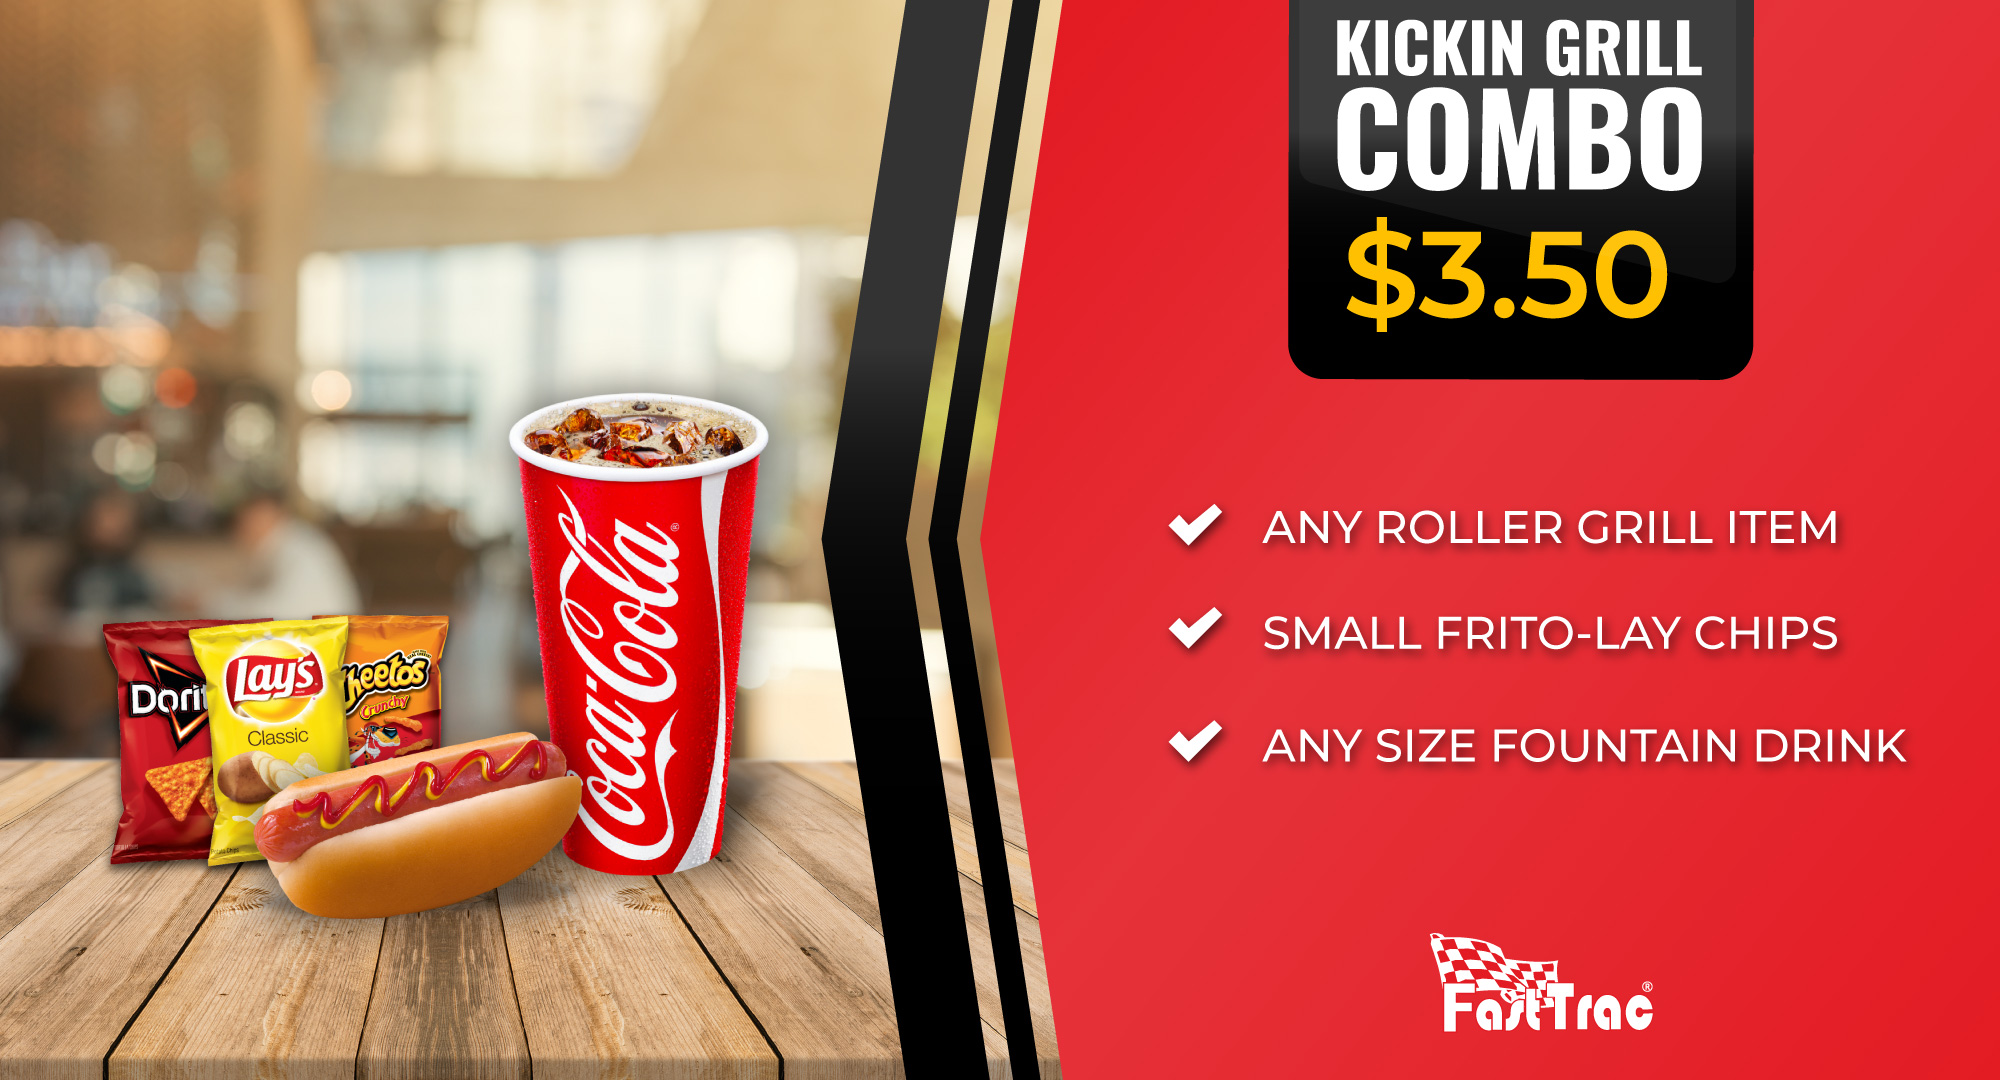 Kickin Grill Combo for $3.50